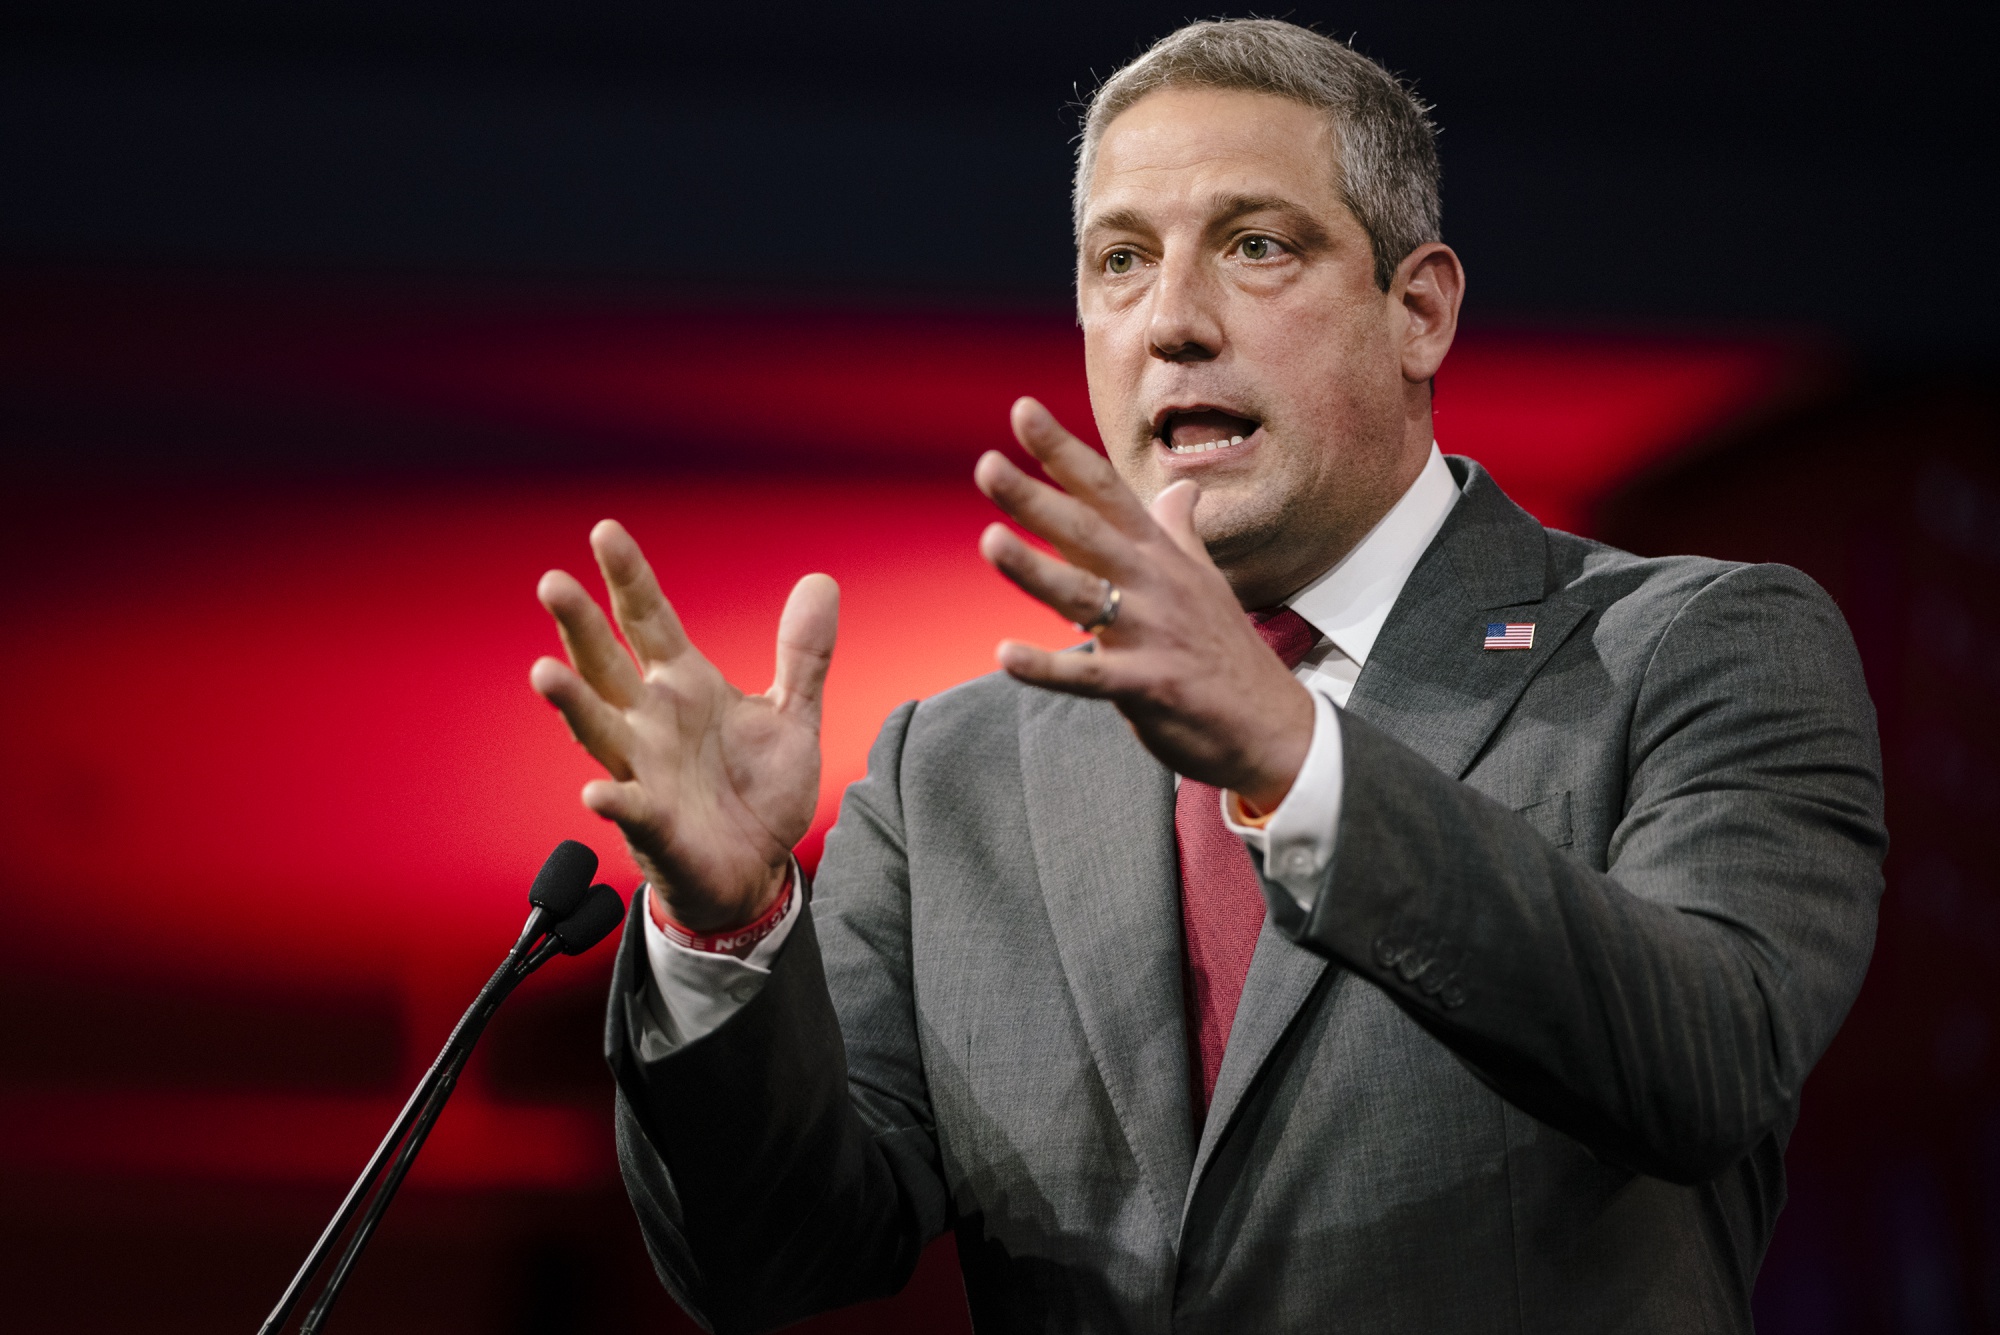 Tim Ryan Says He Doesn’t Think Biden Has Energy to Defeat Trump - Bloomberg